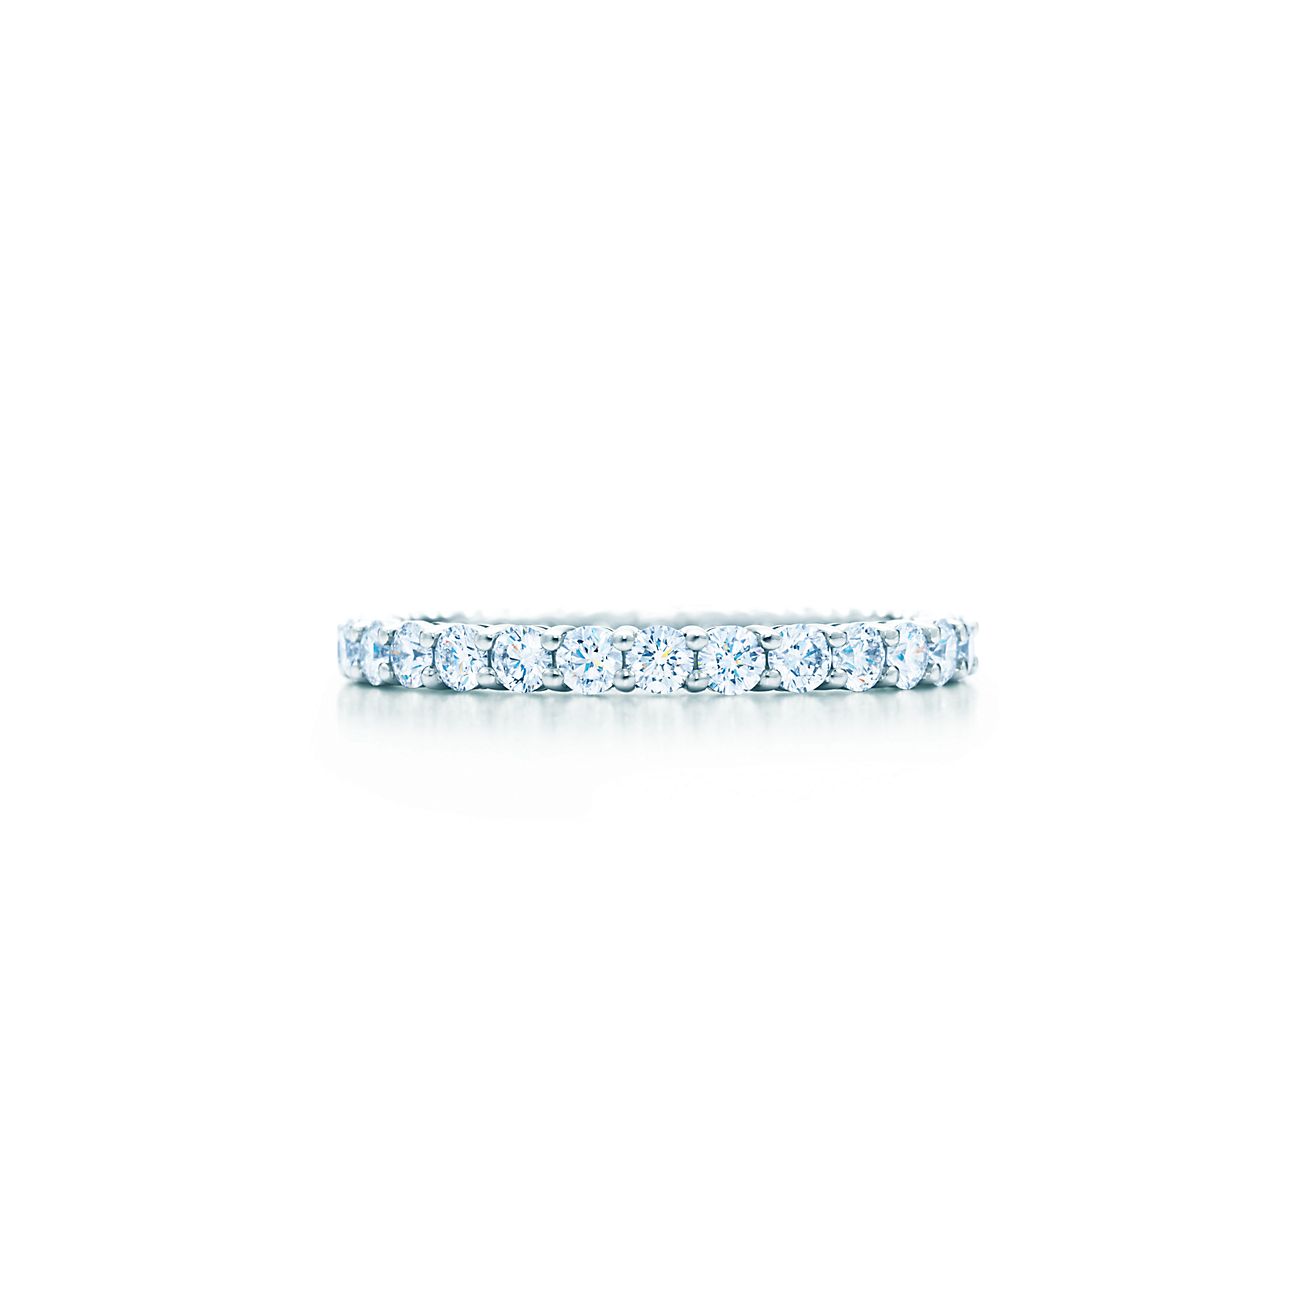 Tiffany Embrace® band ring in platinum 